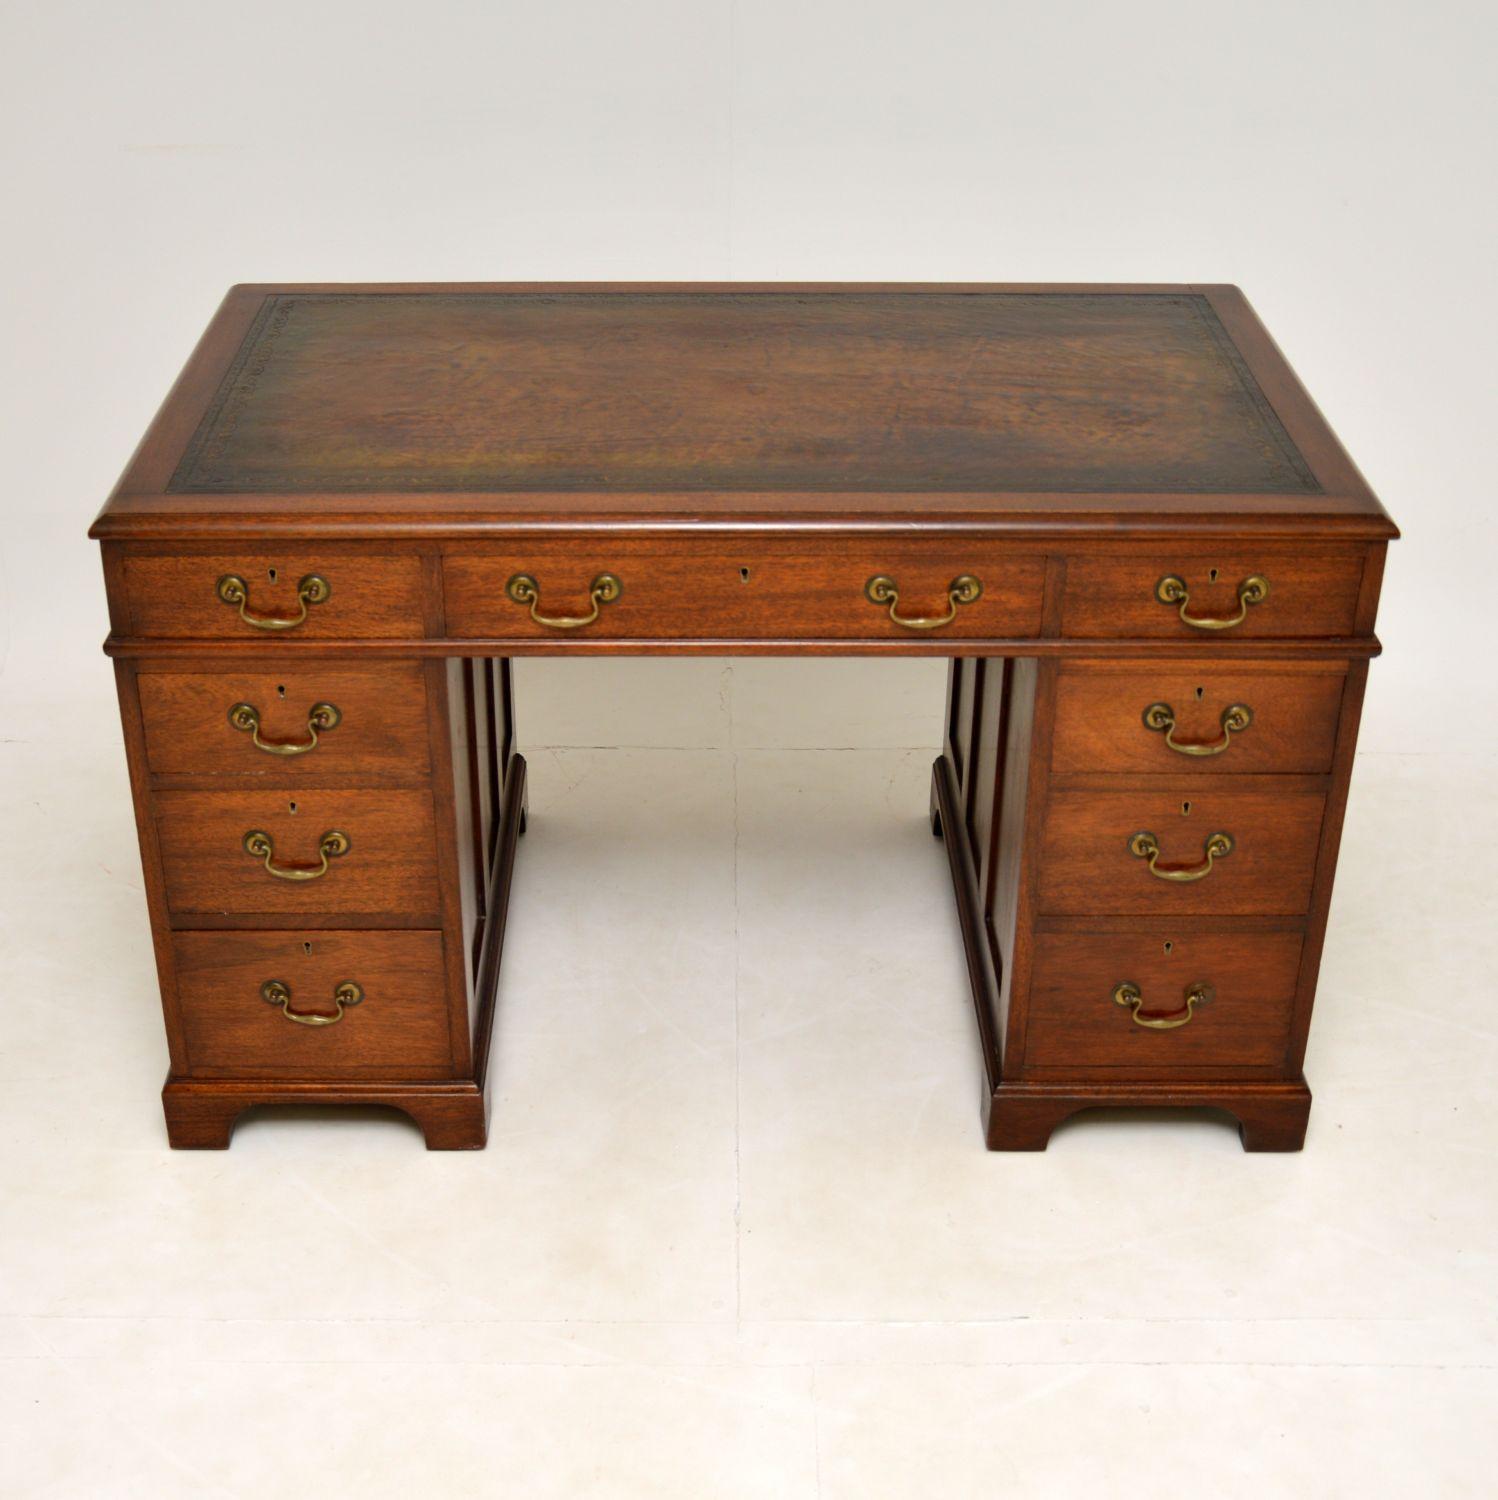 This antique Georgian style mahogany pedestal desk is a nice useful size with plenty of working area & a generous kneehole space. This was made in England and dates from around the 1920-30’s.

The quality is excellent, this is very well built and